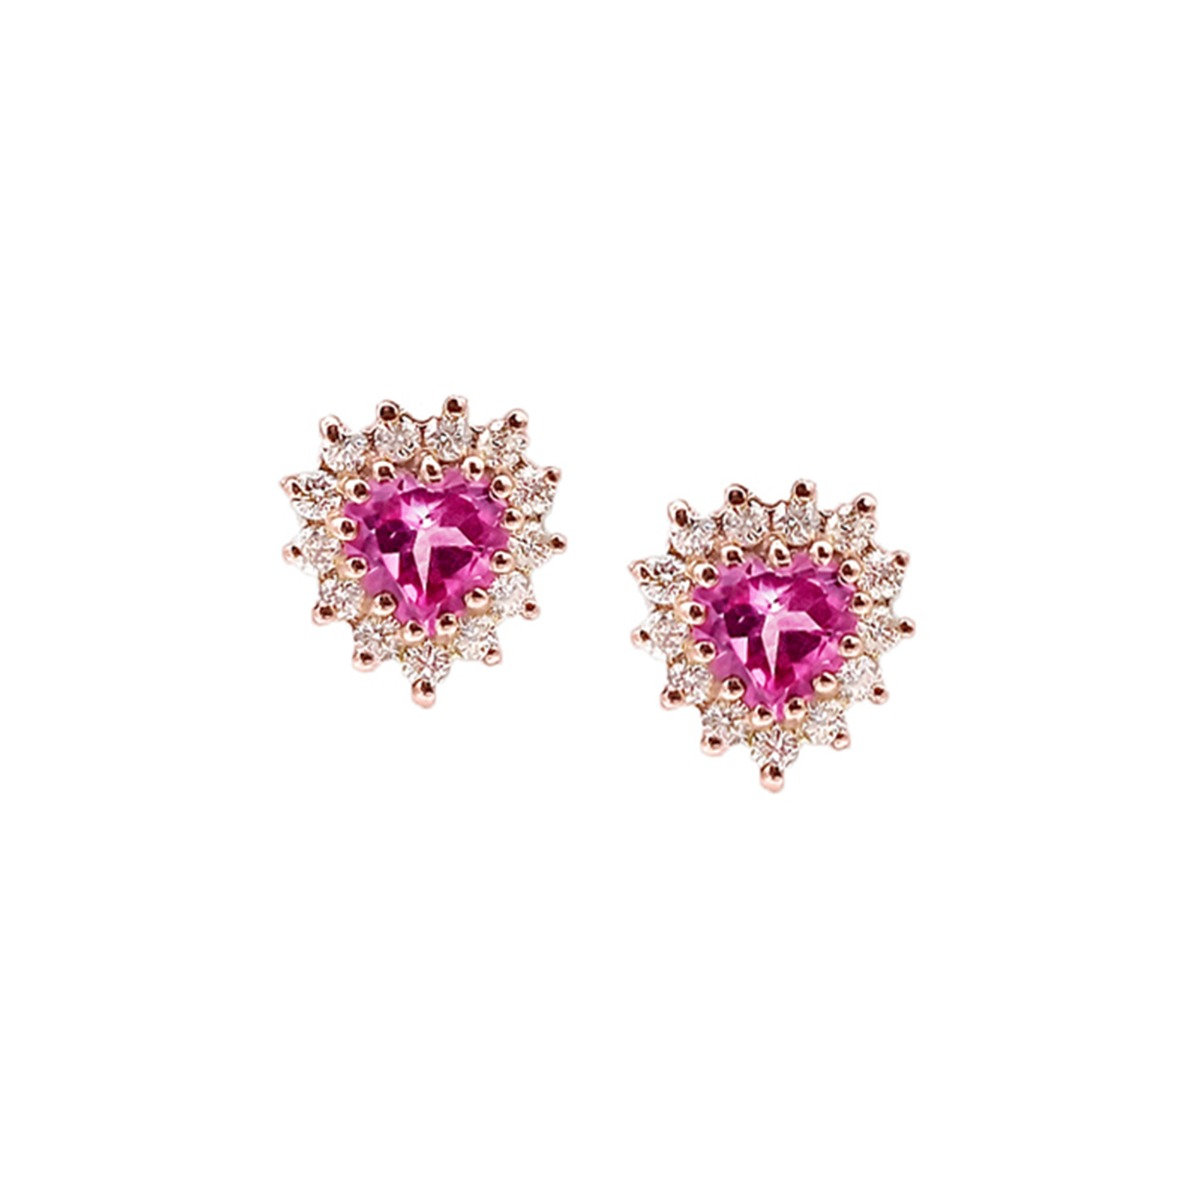 Elegant Earrings In Rose Gold And Diamonds With Heart-Shaped Pink Topaz